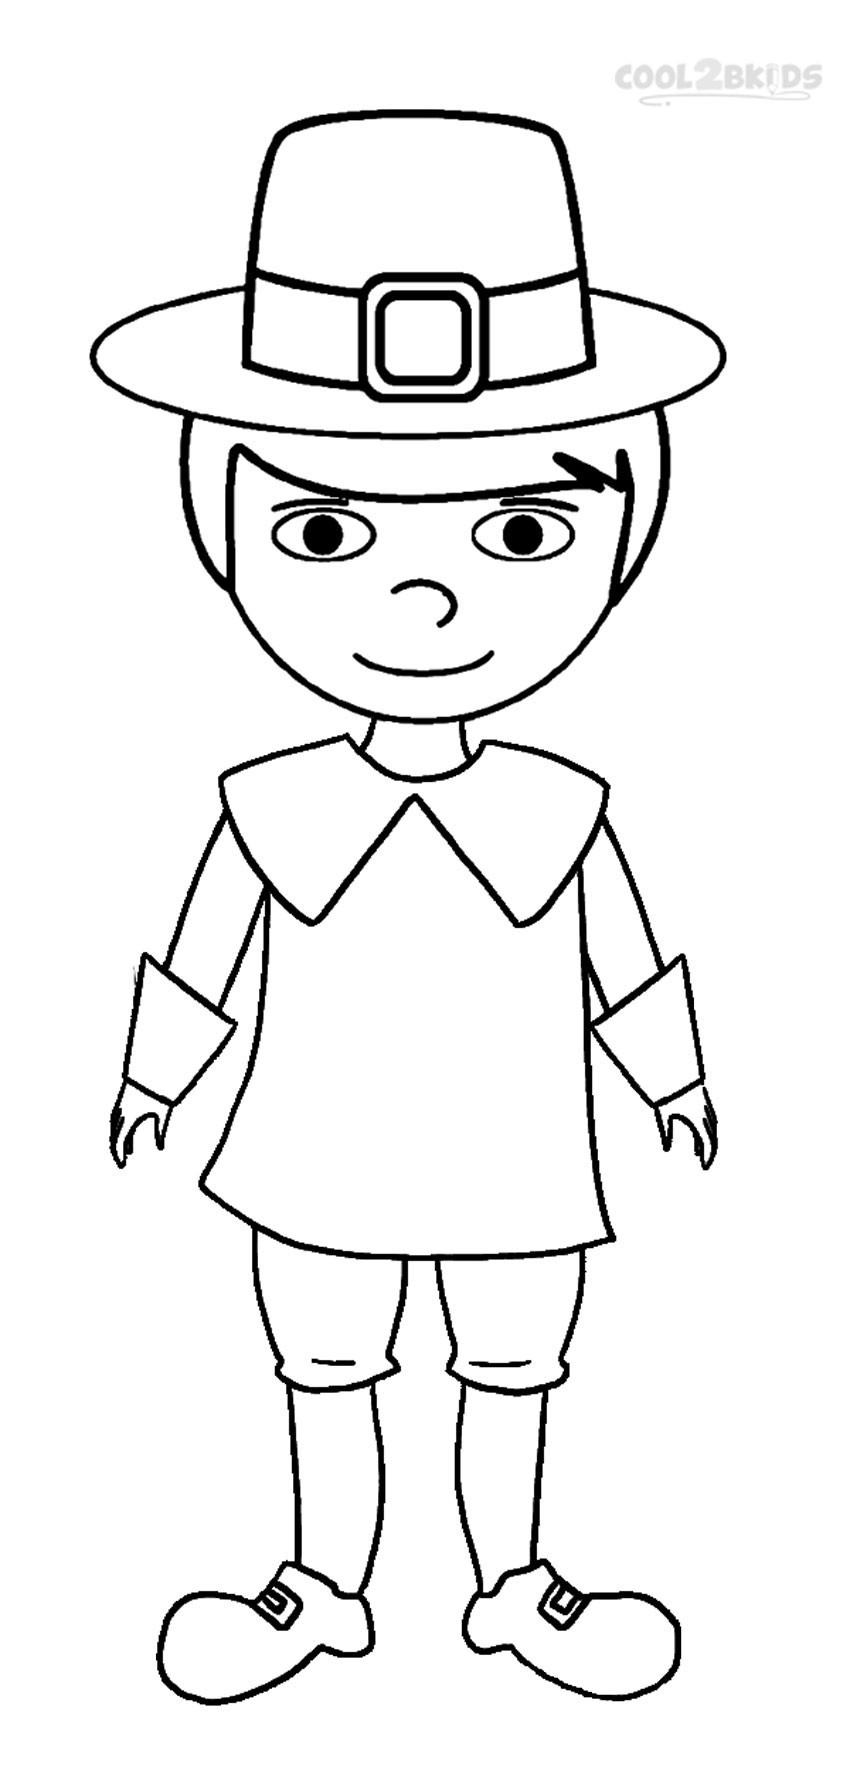 Boys And Girls Coloring Pages
 Printable Pilgrims Coloring Pages For Kids